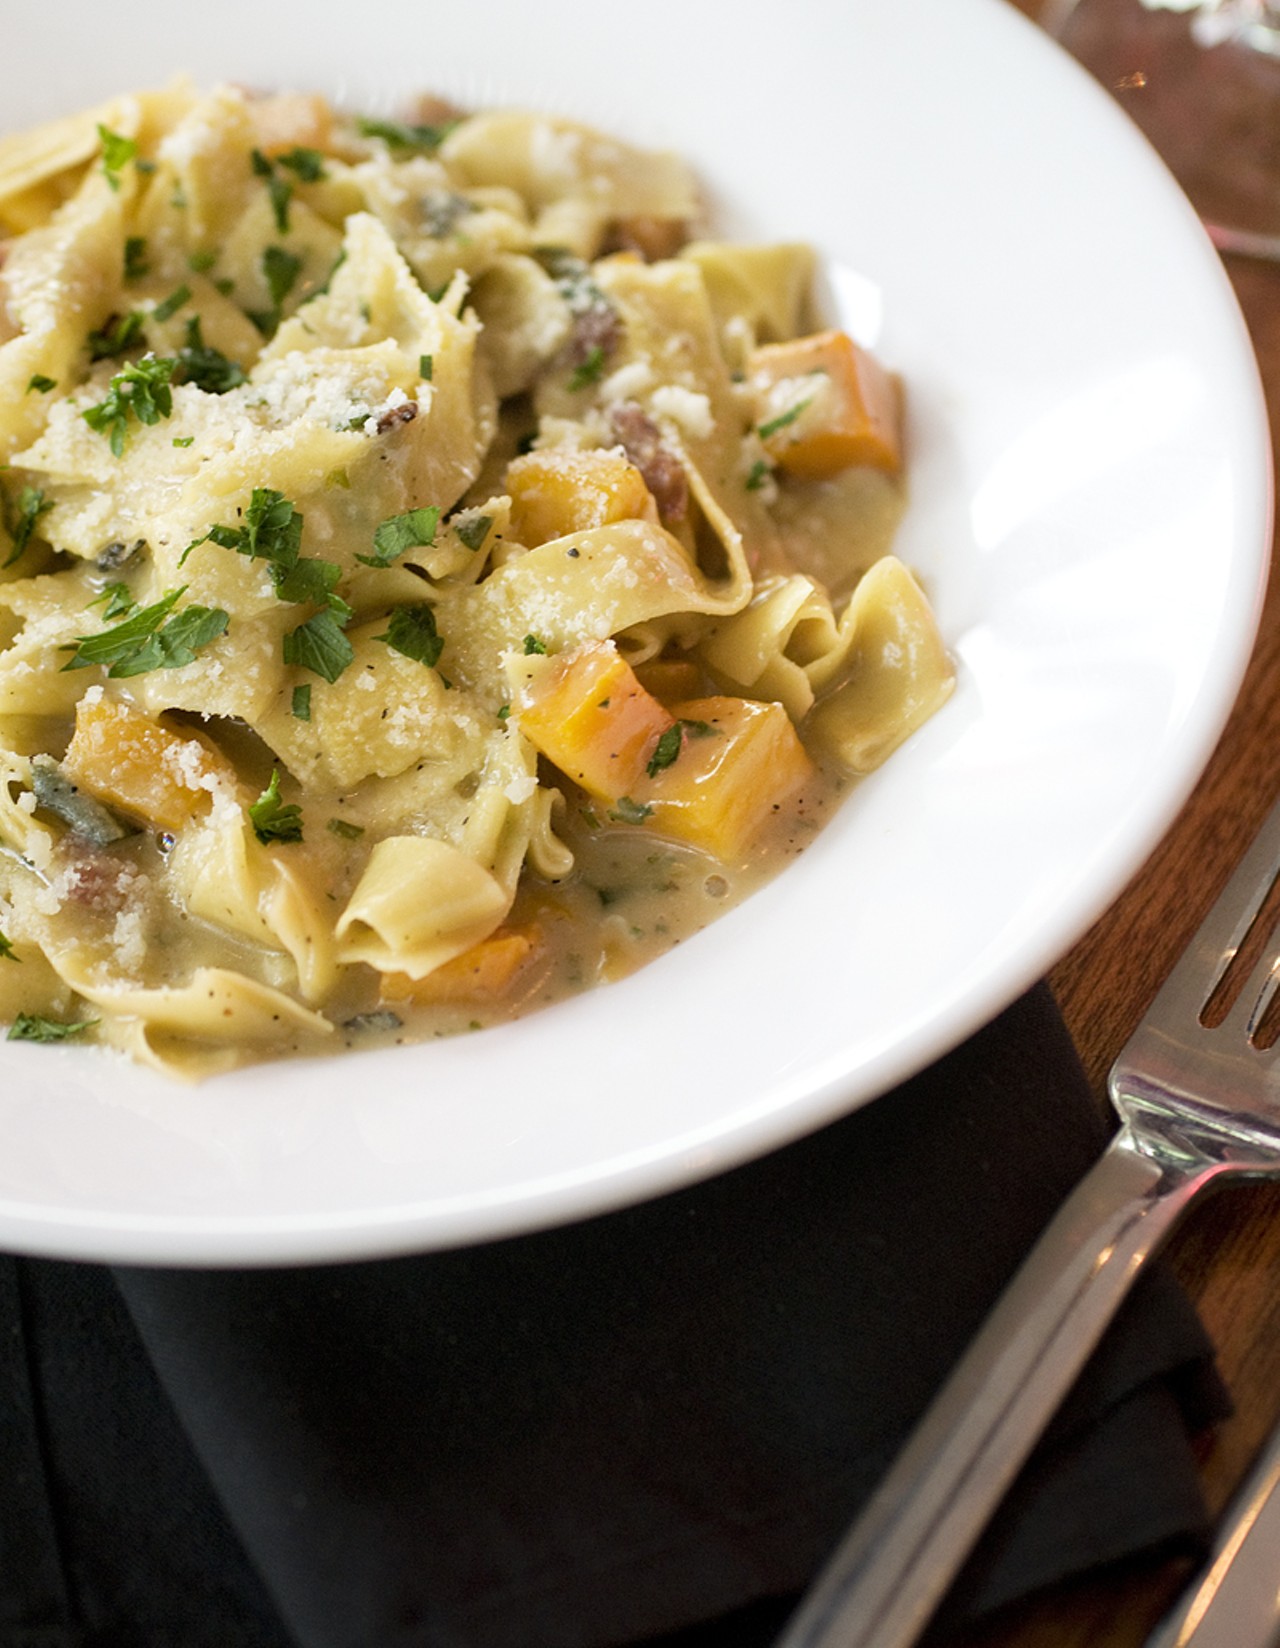 The Stracci with Butternut squash features guanciale, Parmesan and sage.